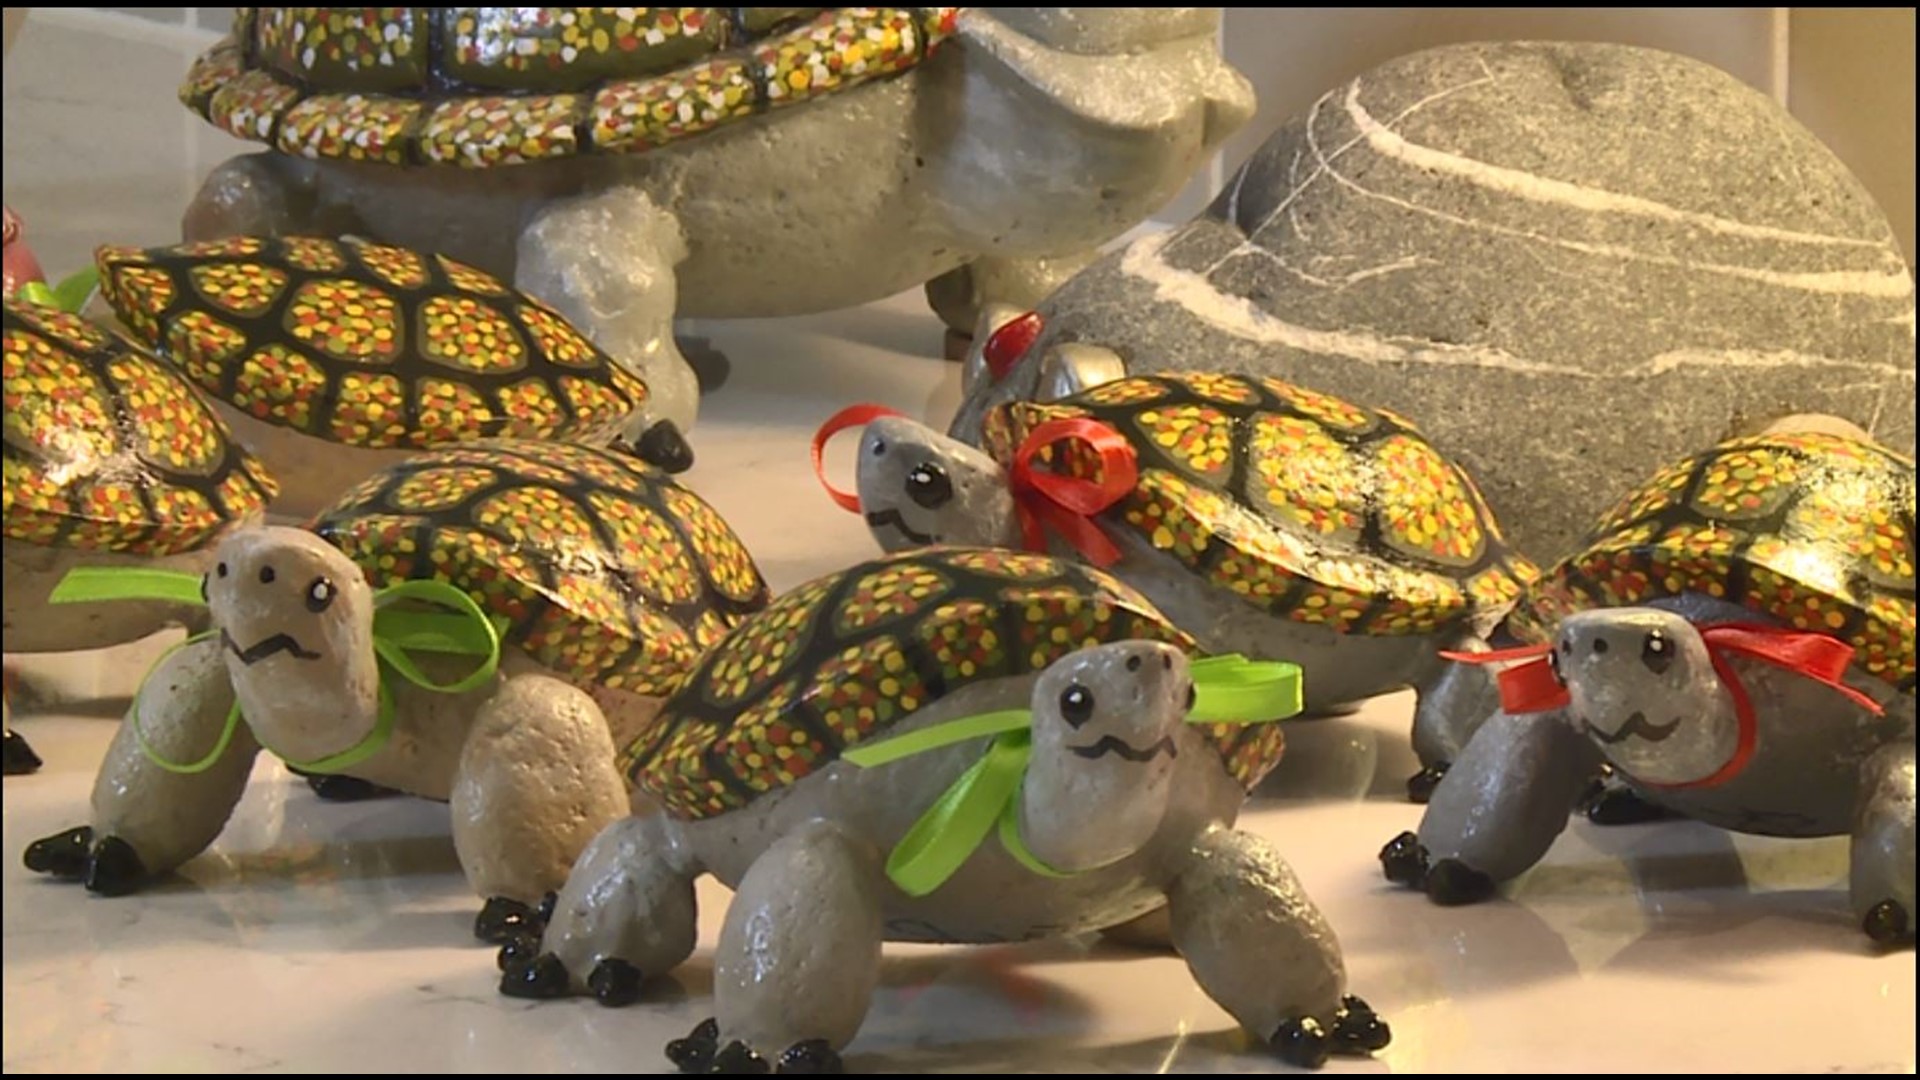 Roger Johnson's stone turtles take six hours to make and just a moment to give away. But, oh what a moment!